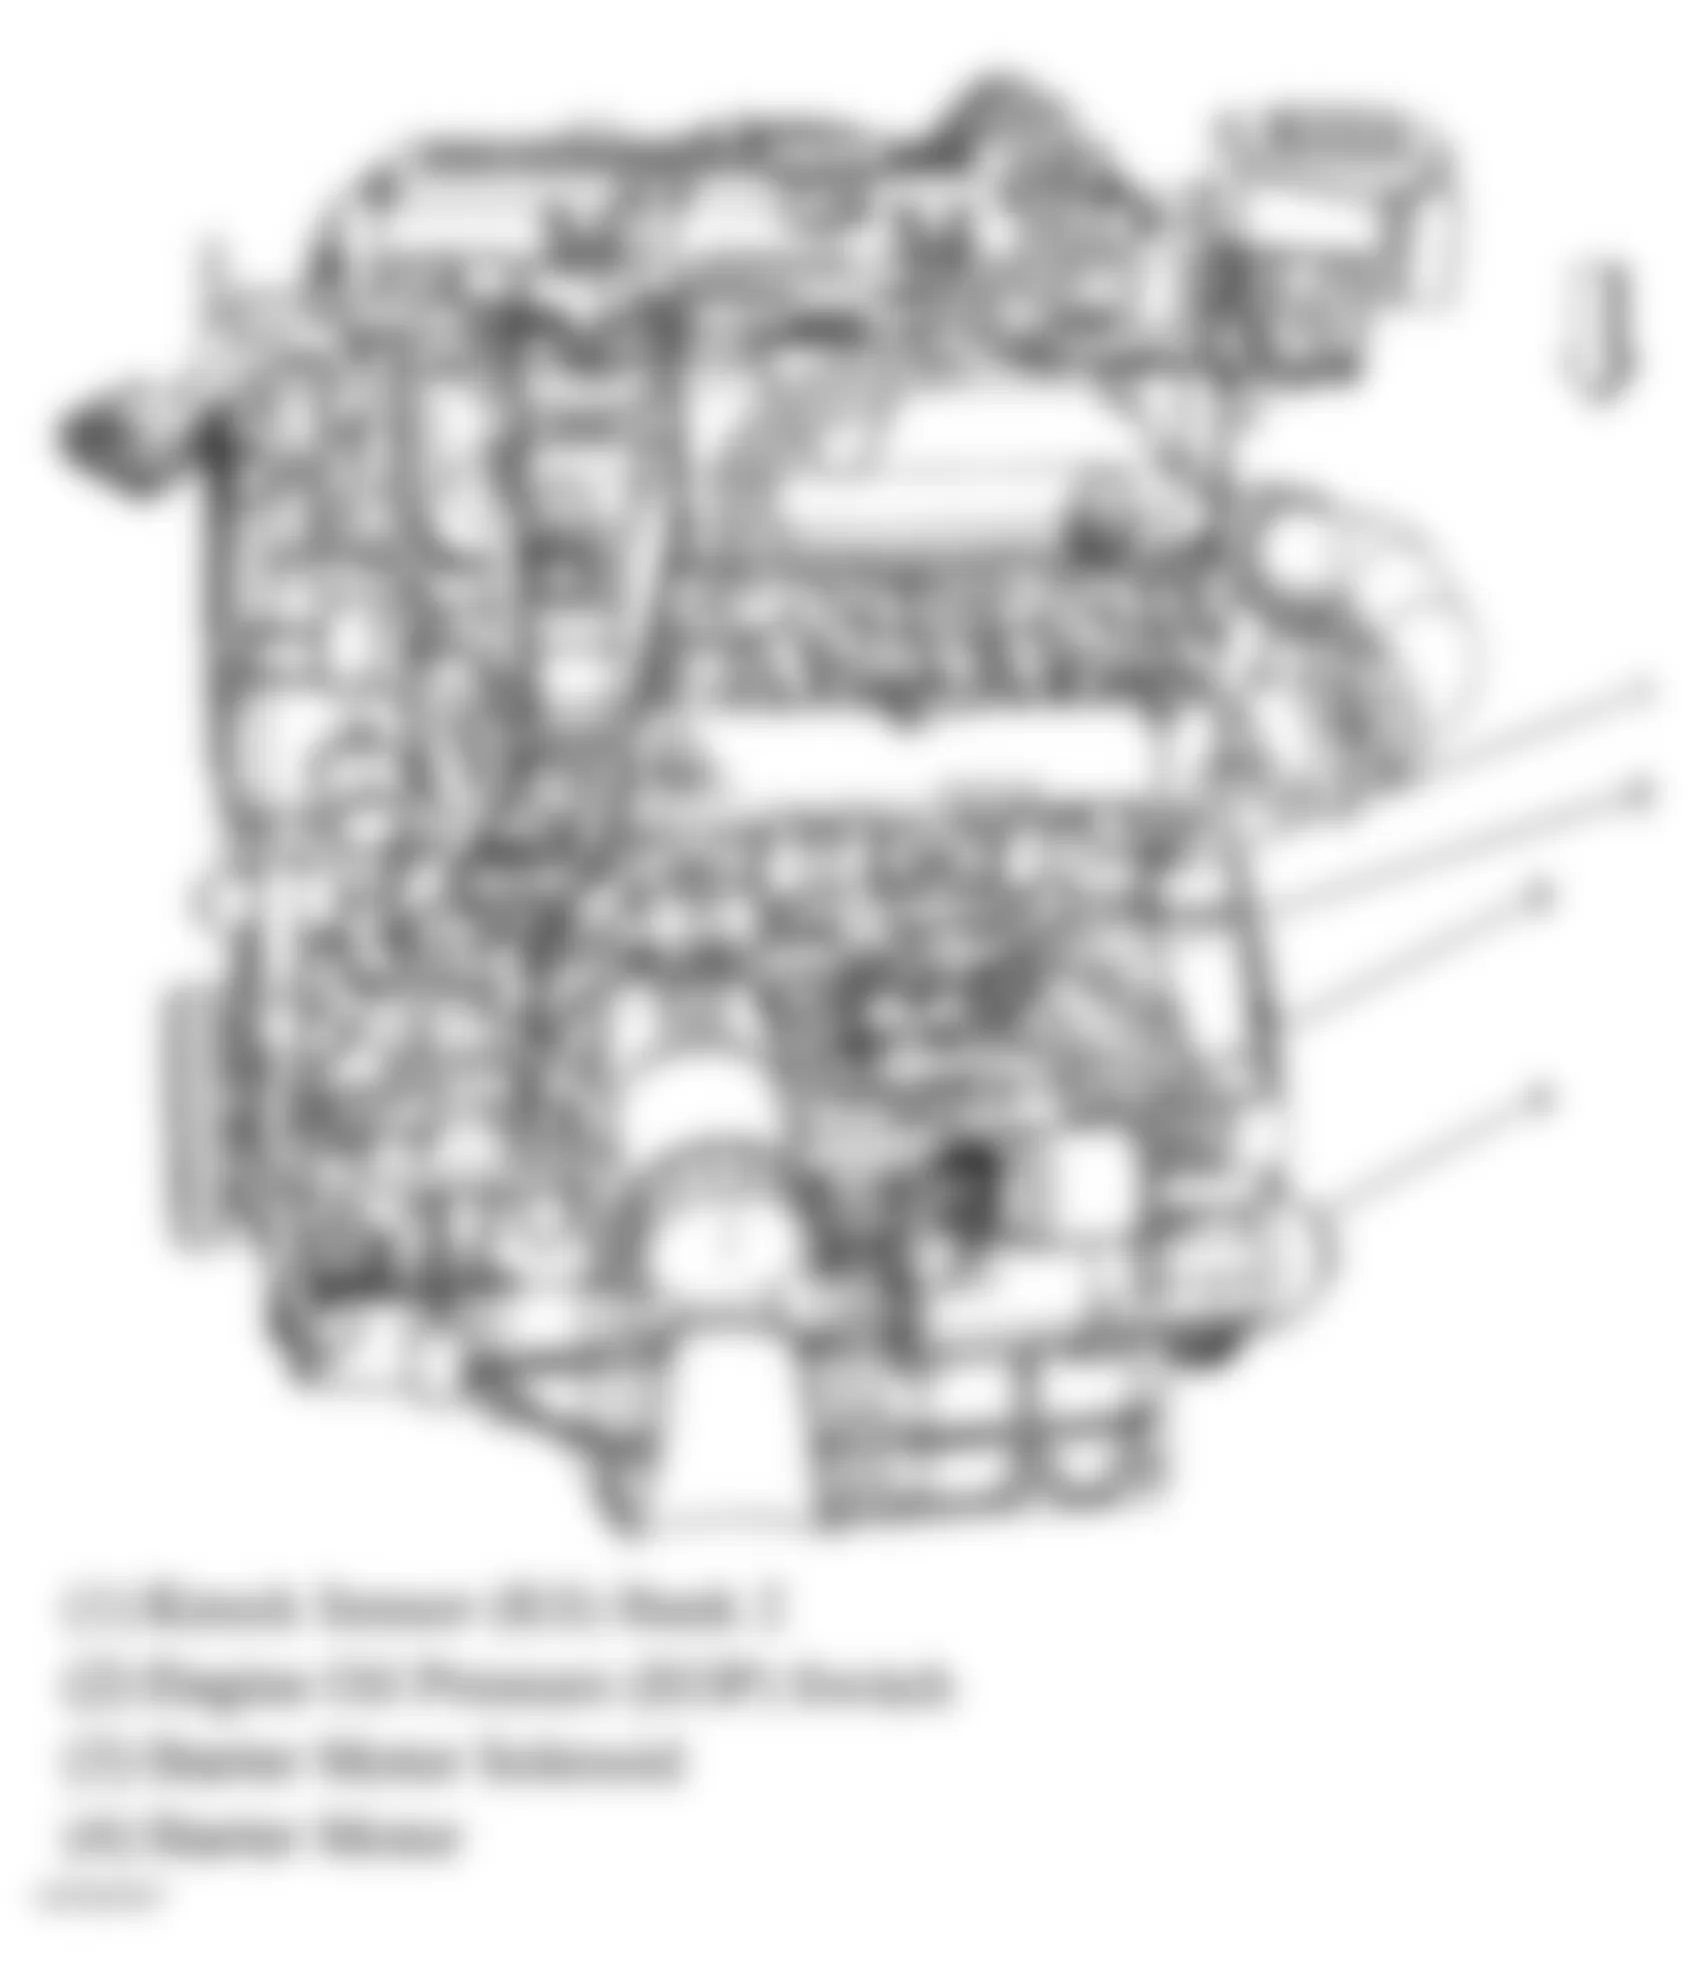 Buick Terraza CXL 2006 - Component Locations -  Left Side Of Engine (3.5L)